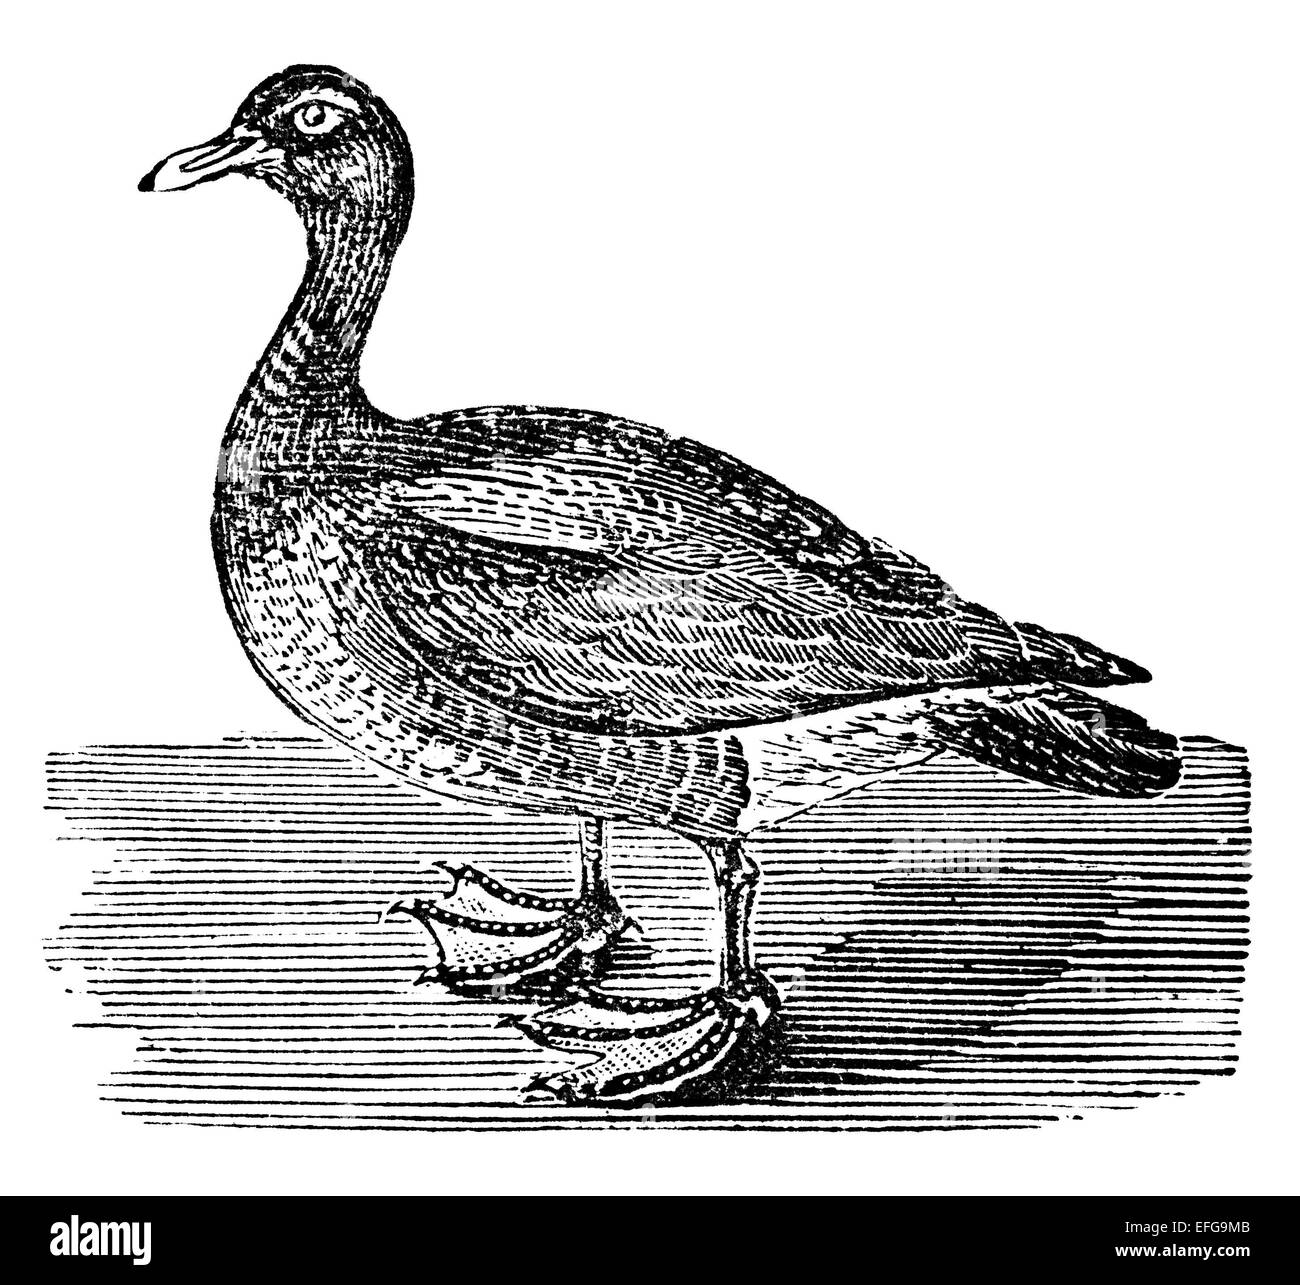 Victorian engraving of a goose. Digitally restored image from a mid-19th century Encyclopaedia. Stock Photo